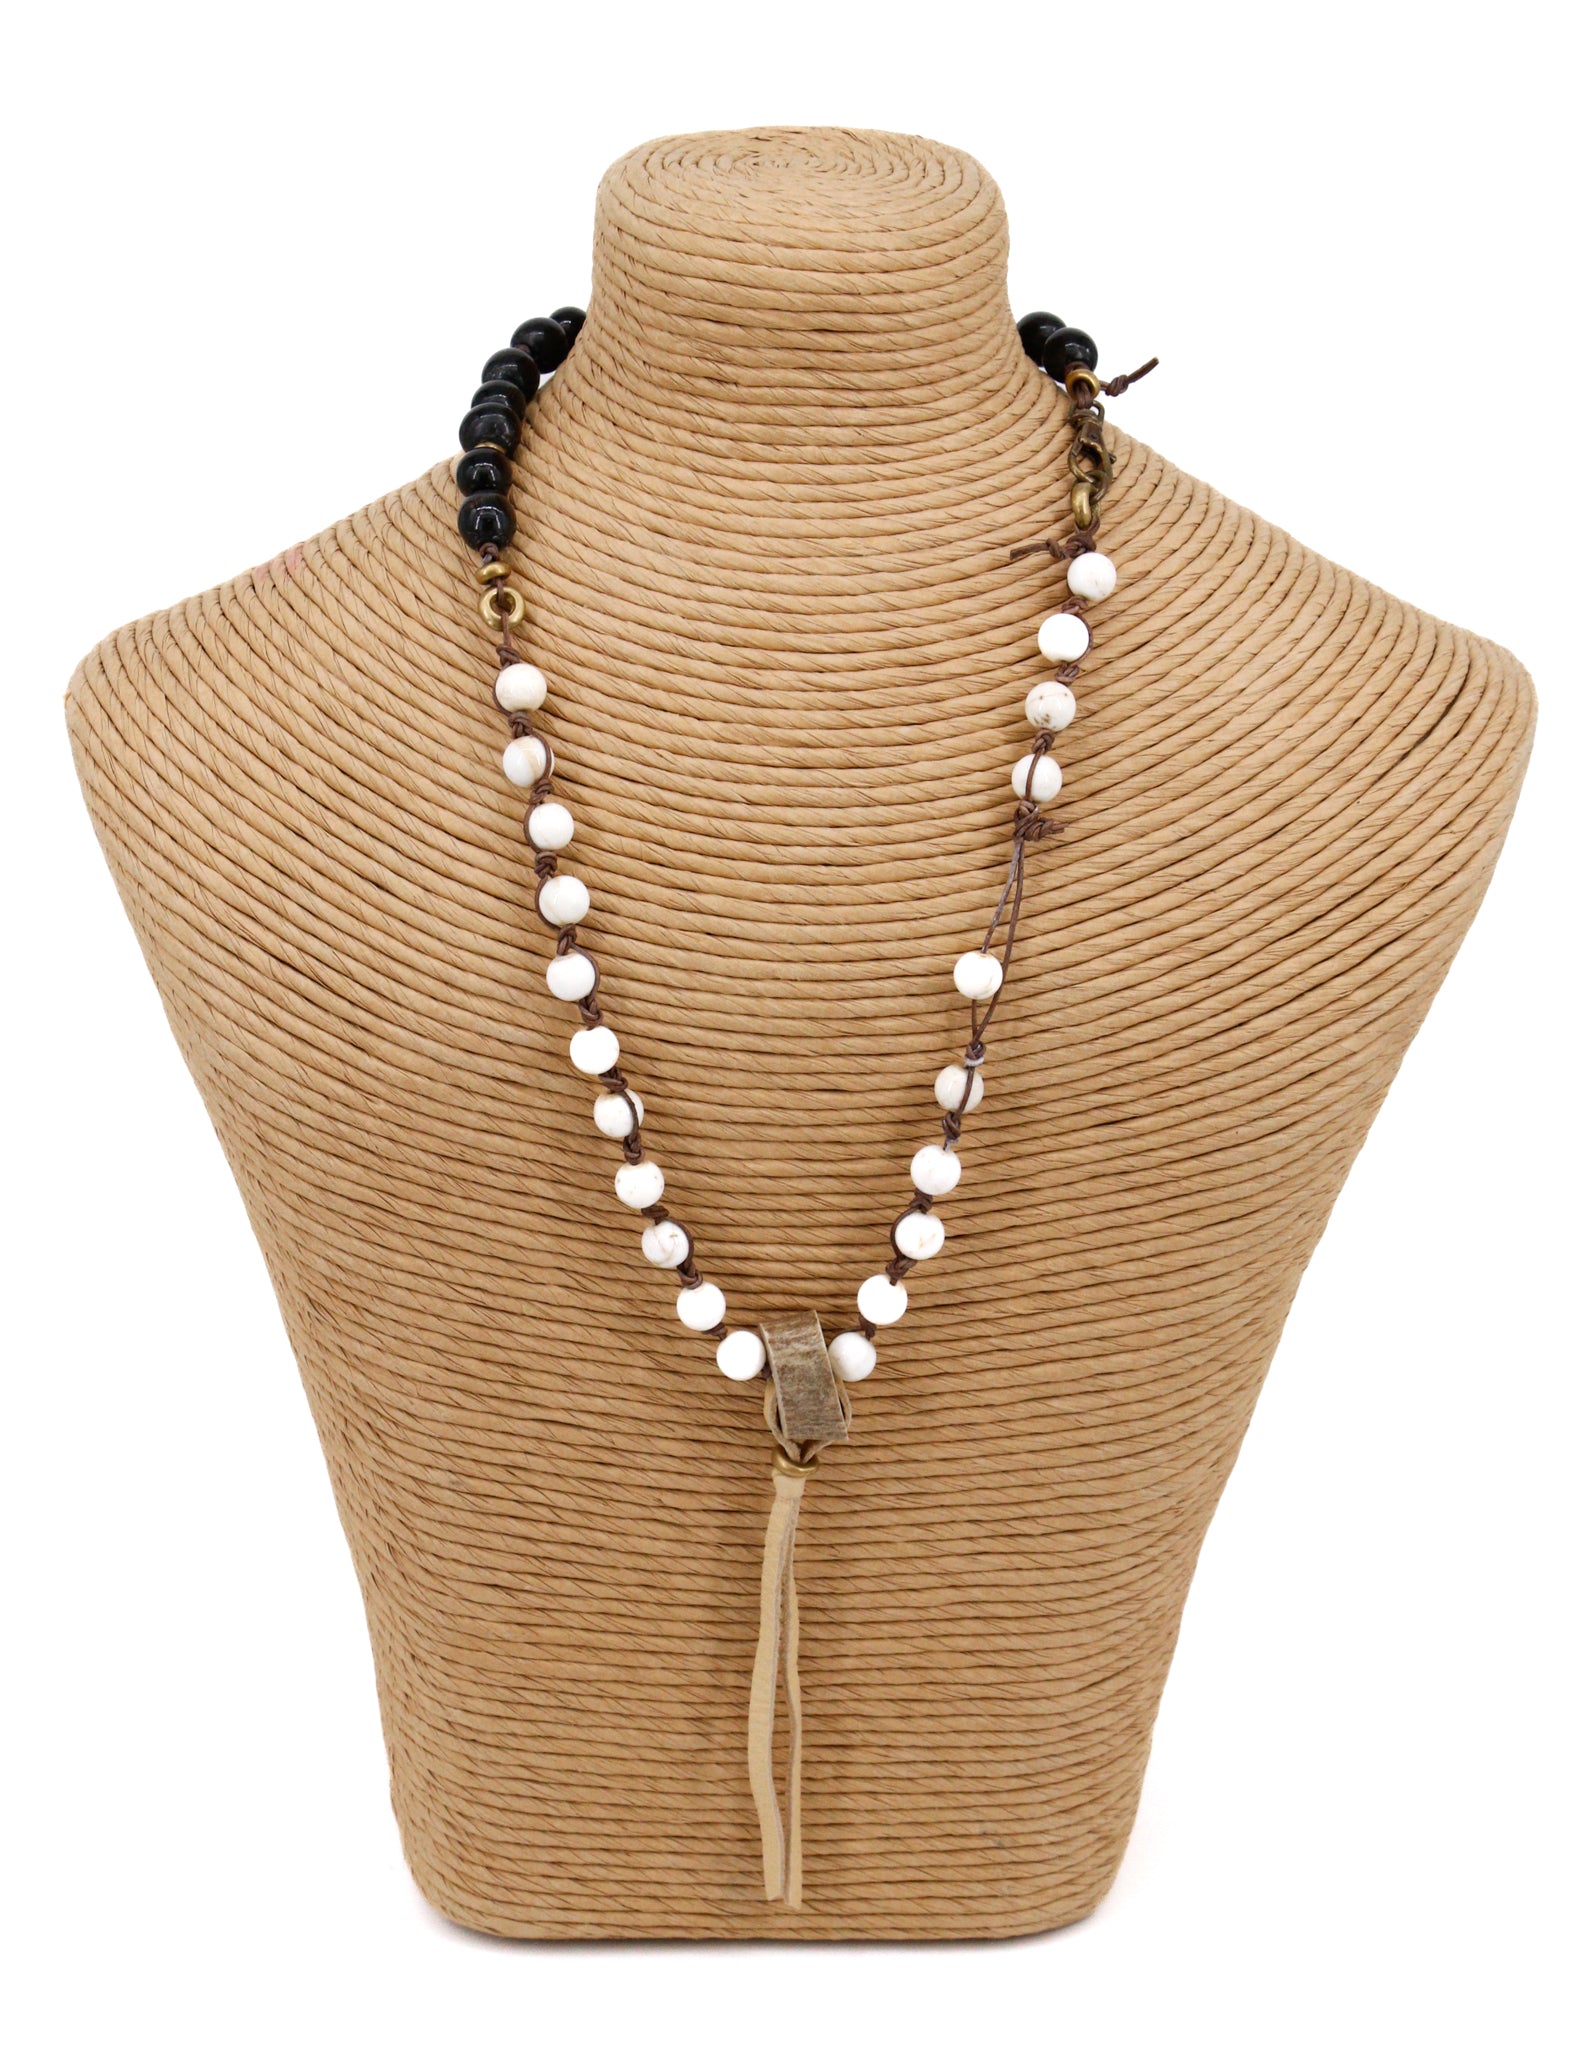 White conch and black buffalo horn necklace